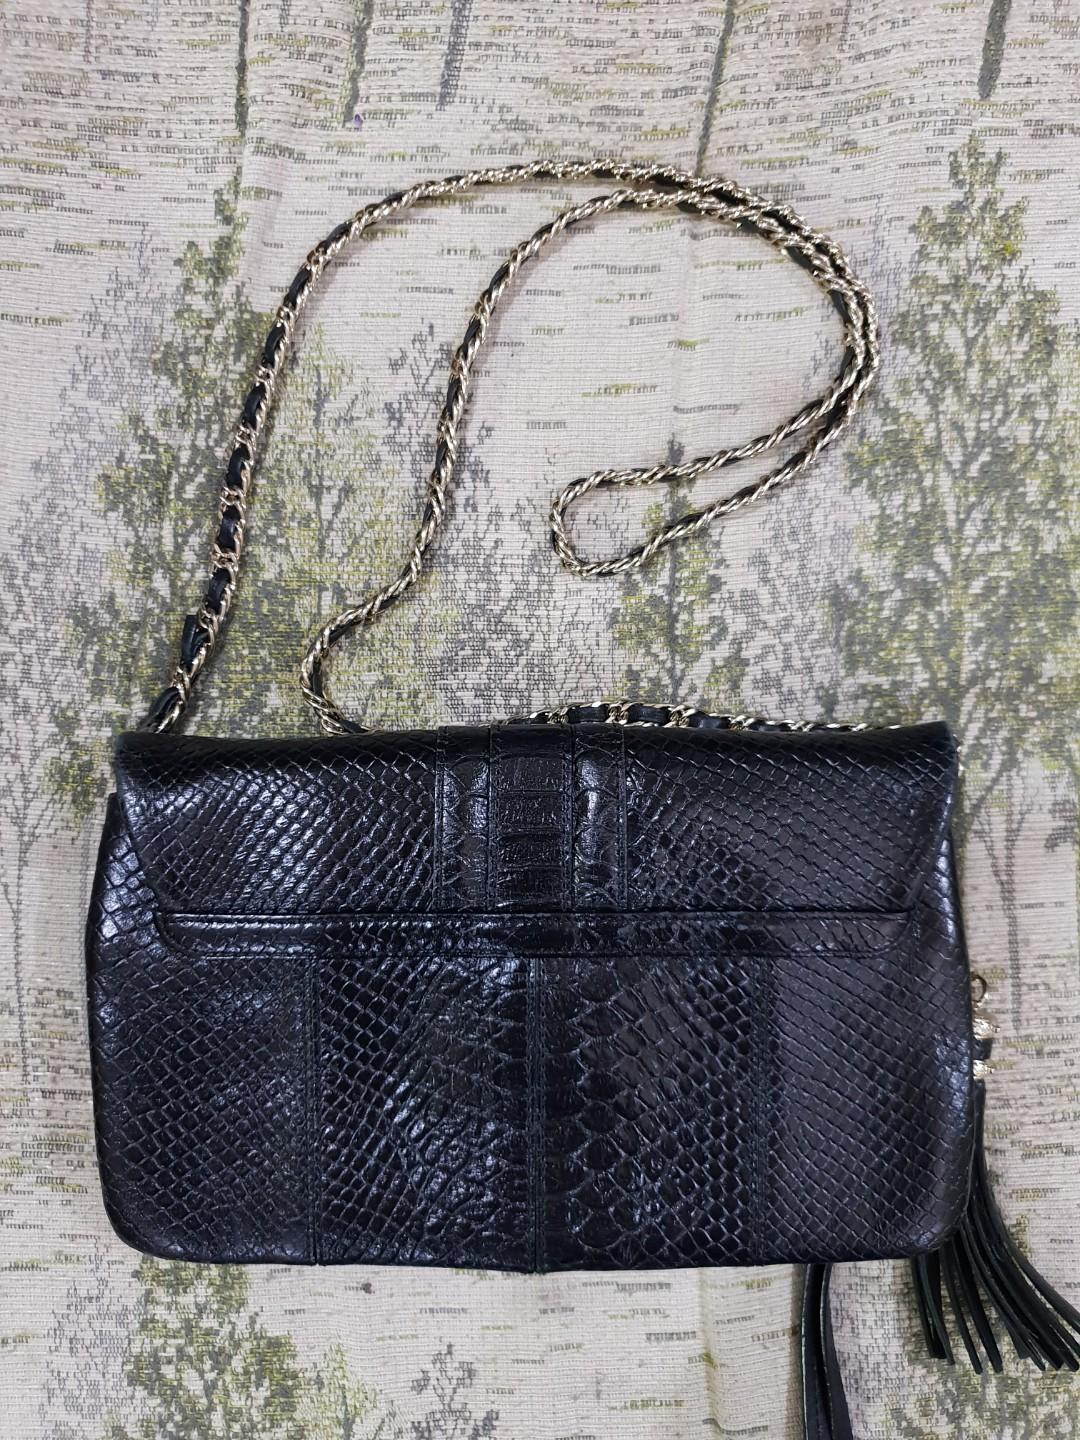 Authentic Metro city snake skin leather chain bag